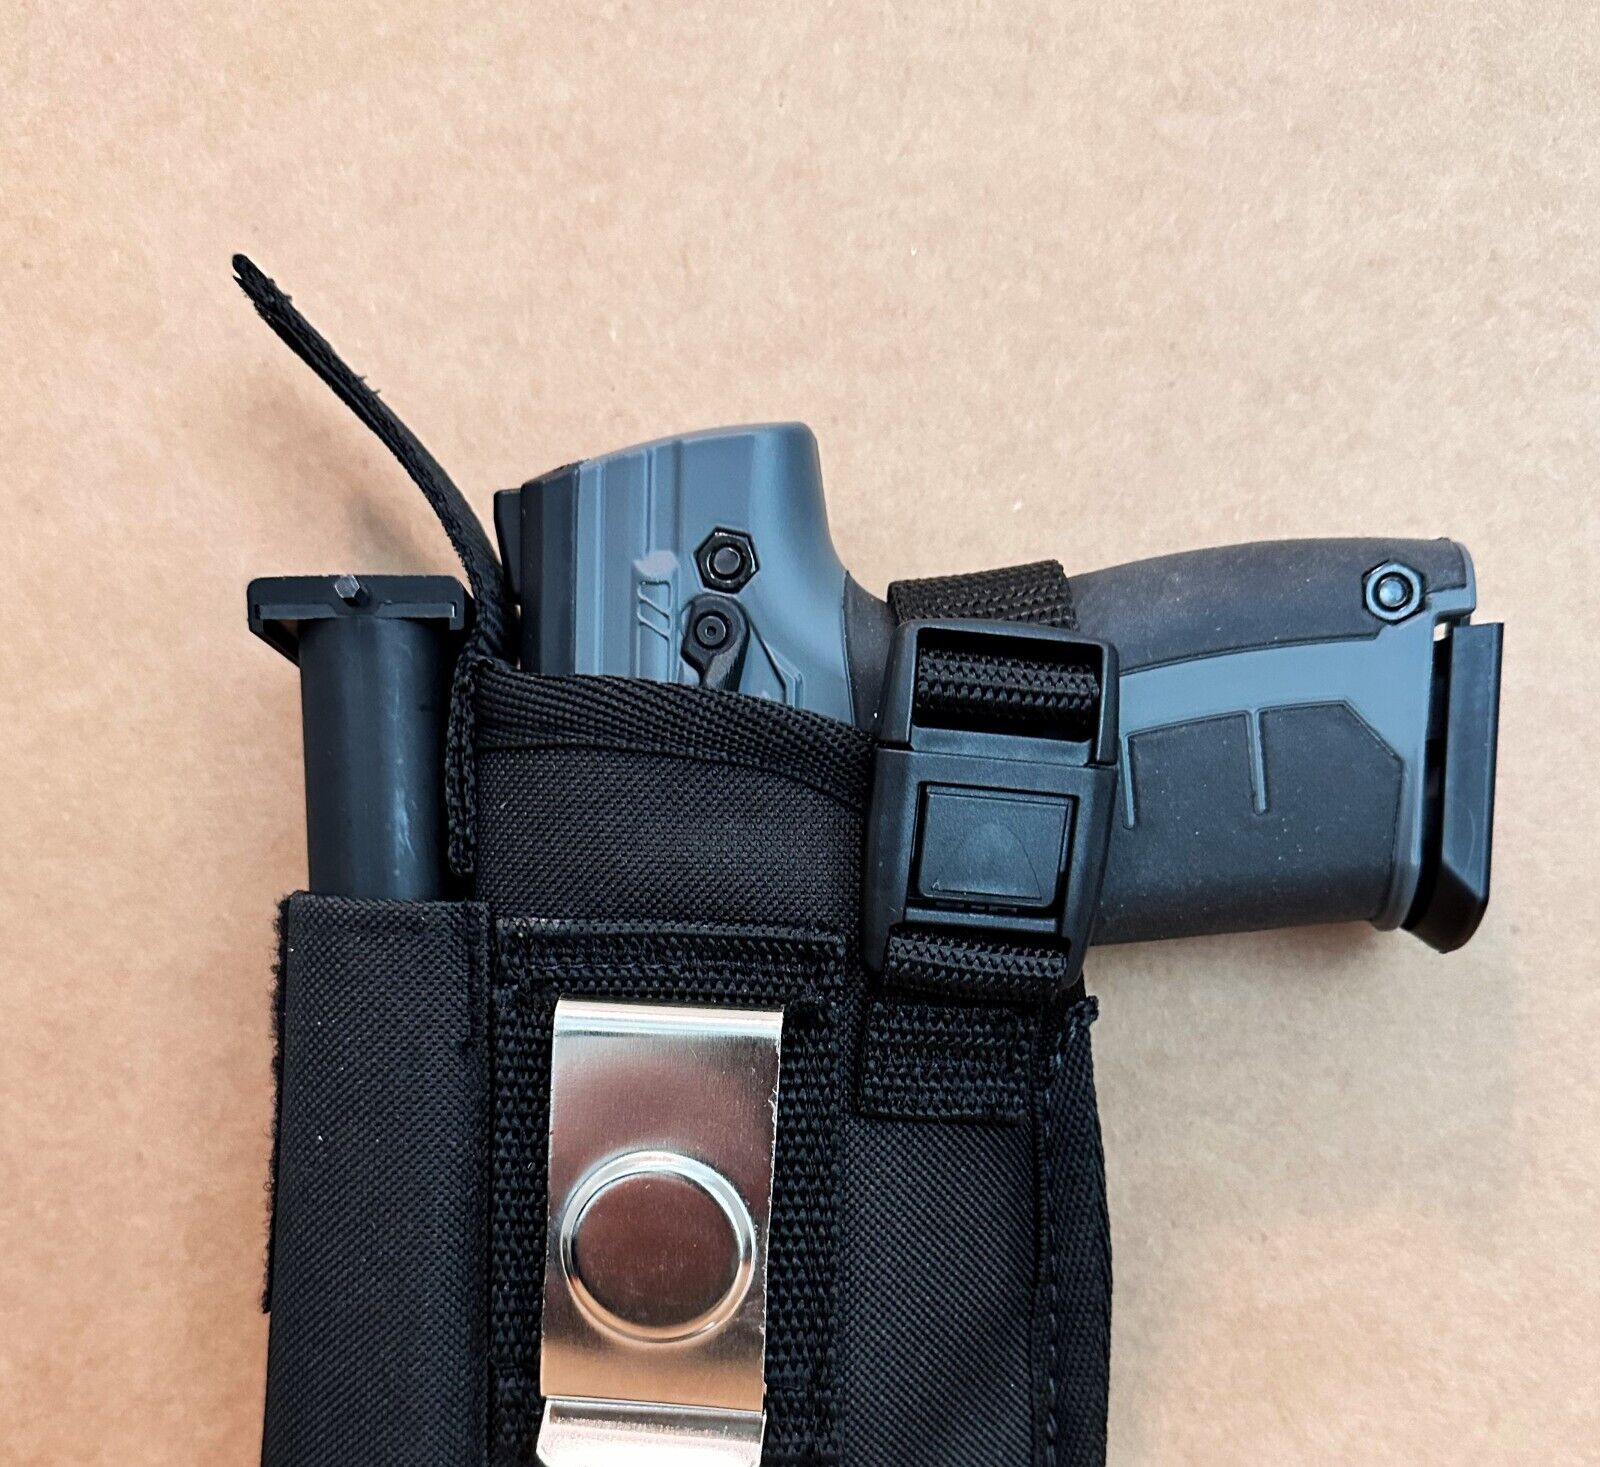 Byrna New Model Combination Holster Only! to hold extra Mag!  **Holster ONLY!!**